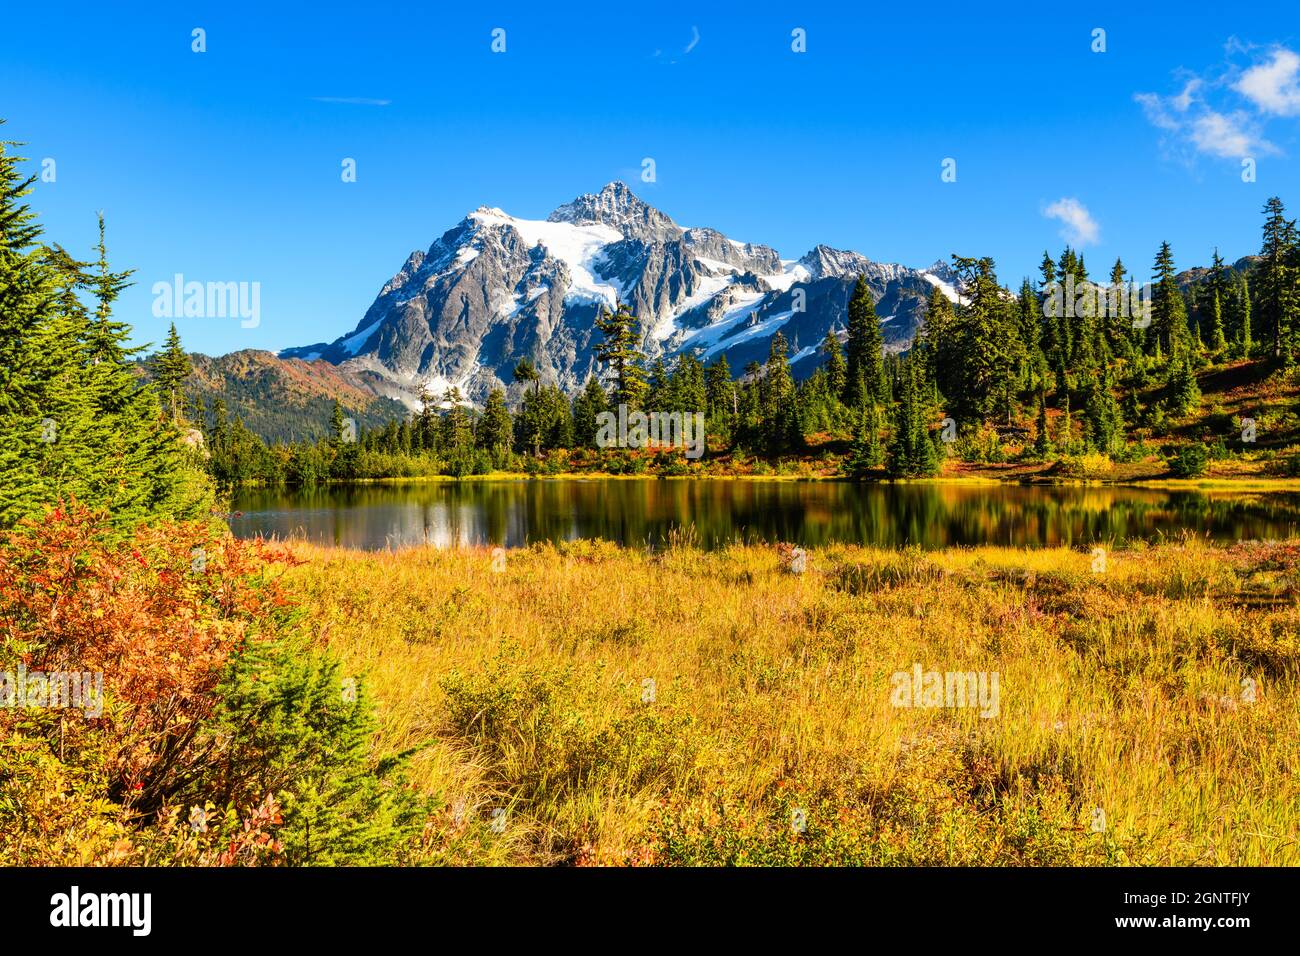 Mount Shuksan rising behind Picture Lake with a foreground of bright fall colors and under a blue sky Stock Photo